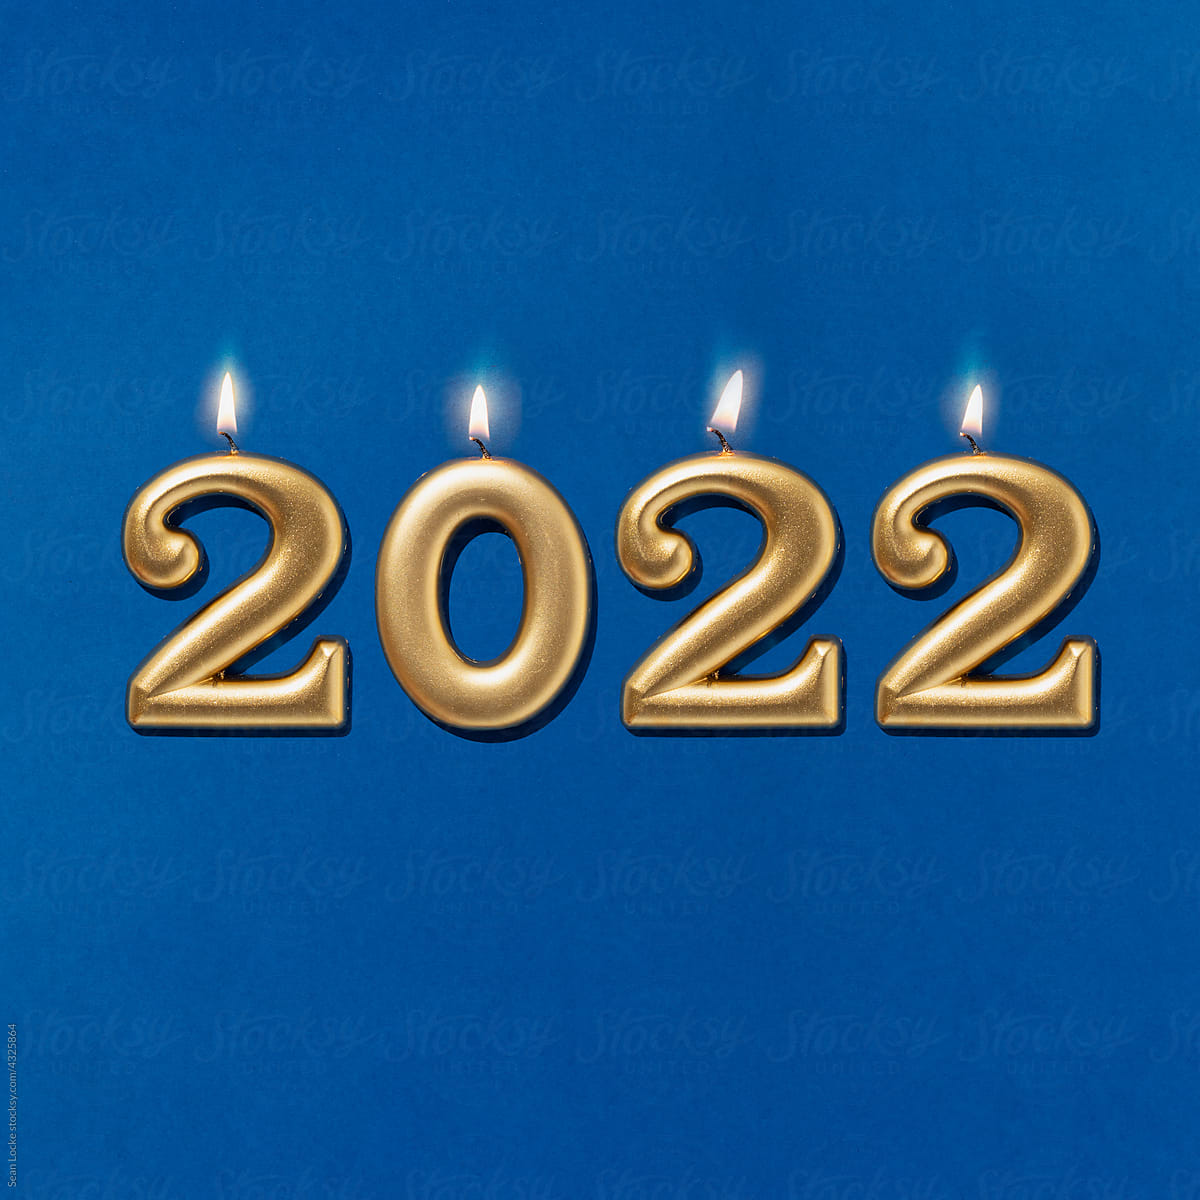 2022 New Year\'s Candles On Classic Blue Background